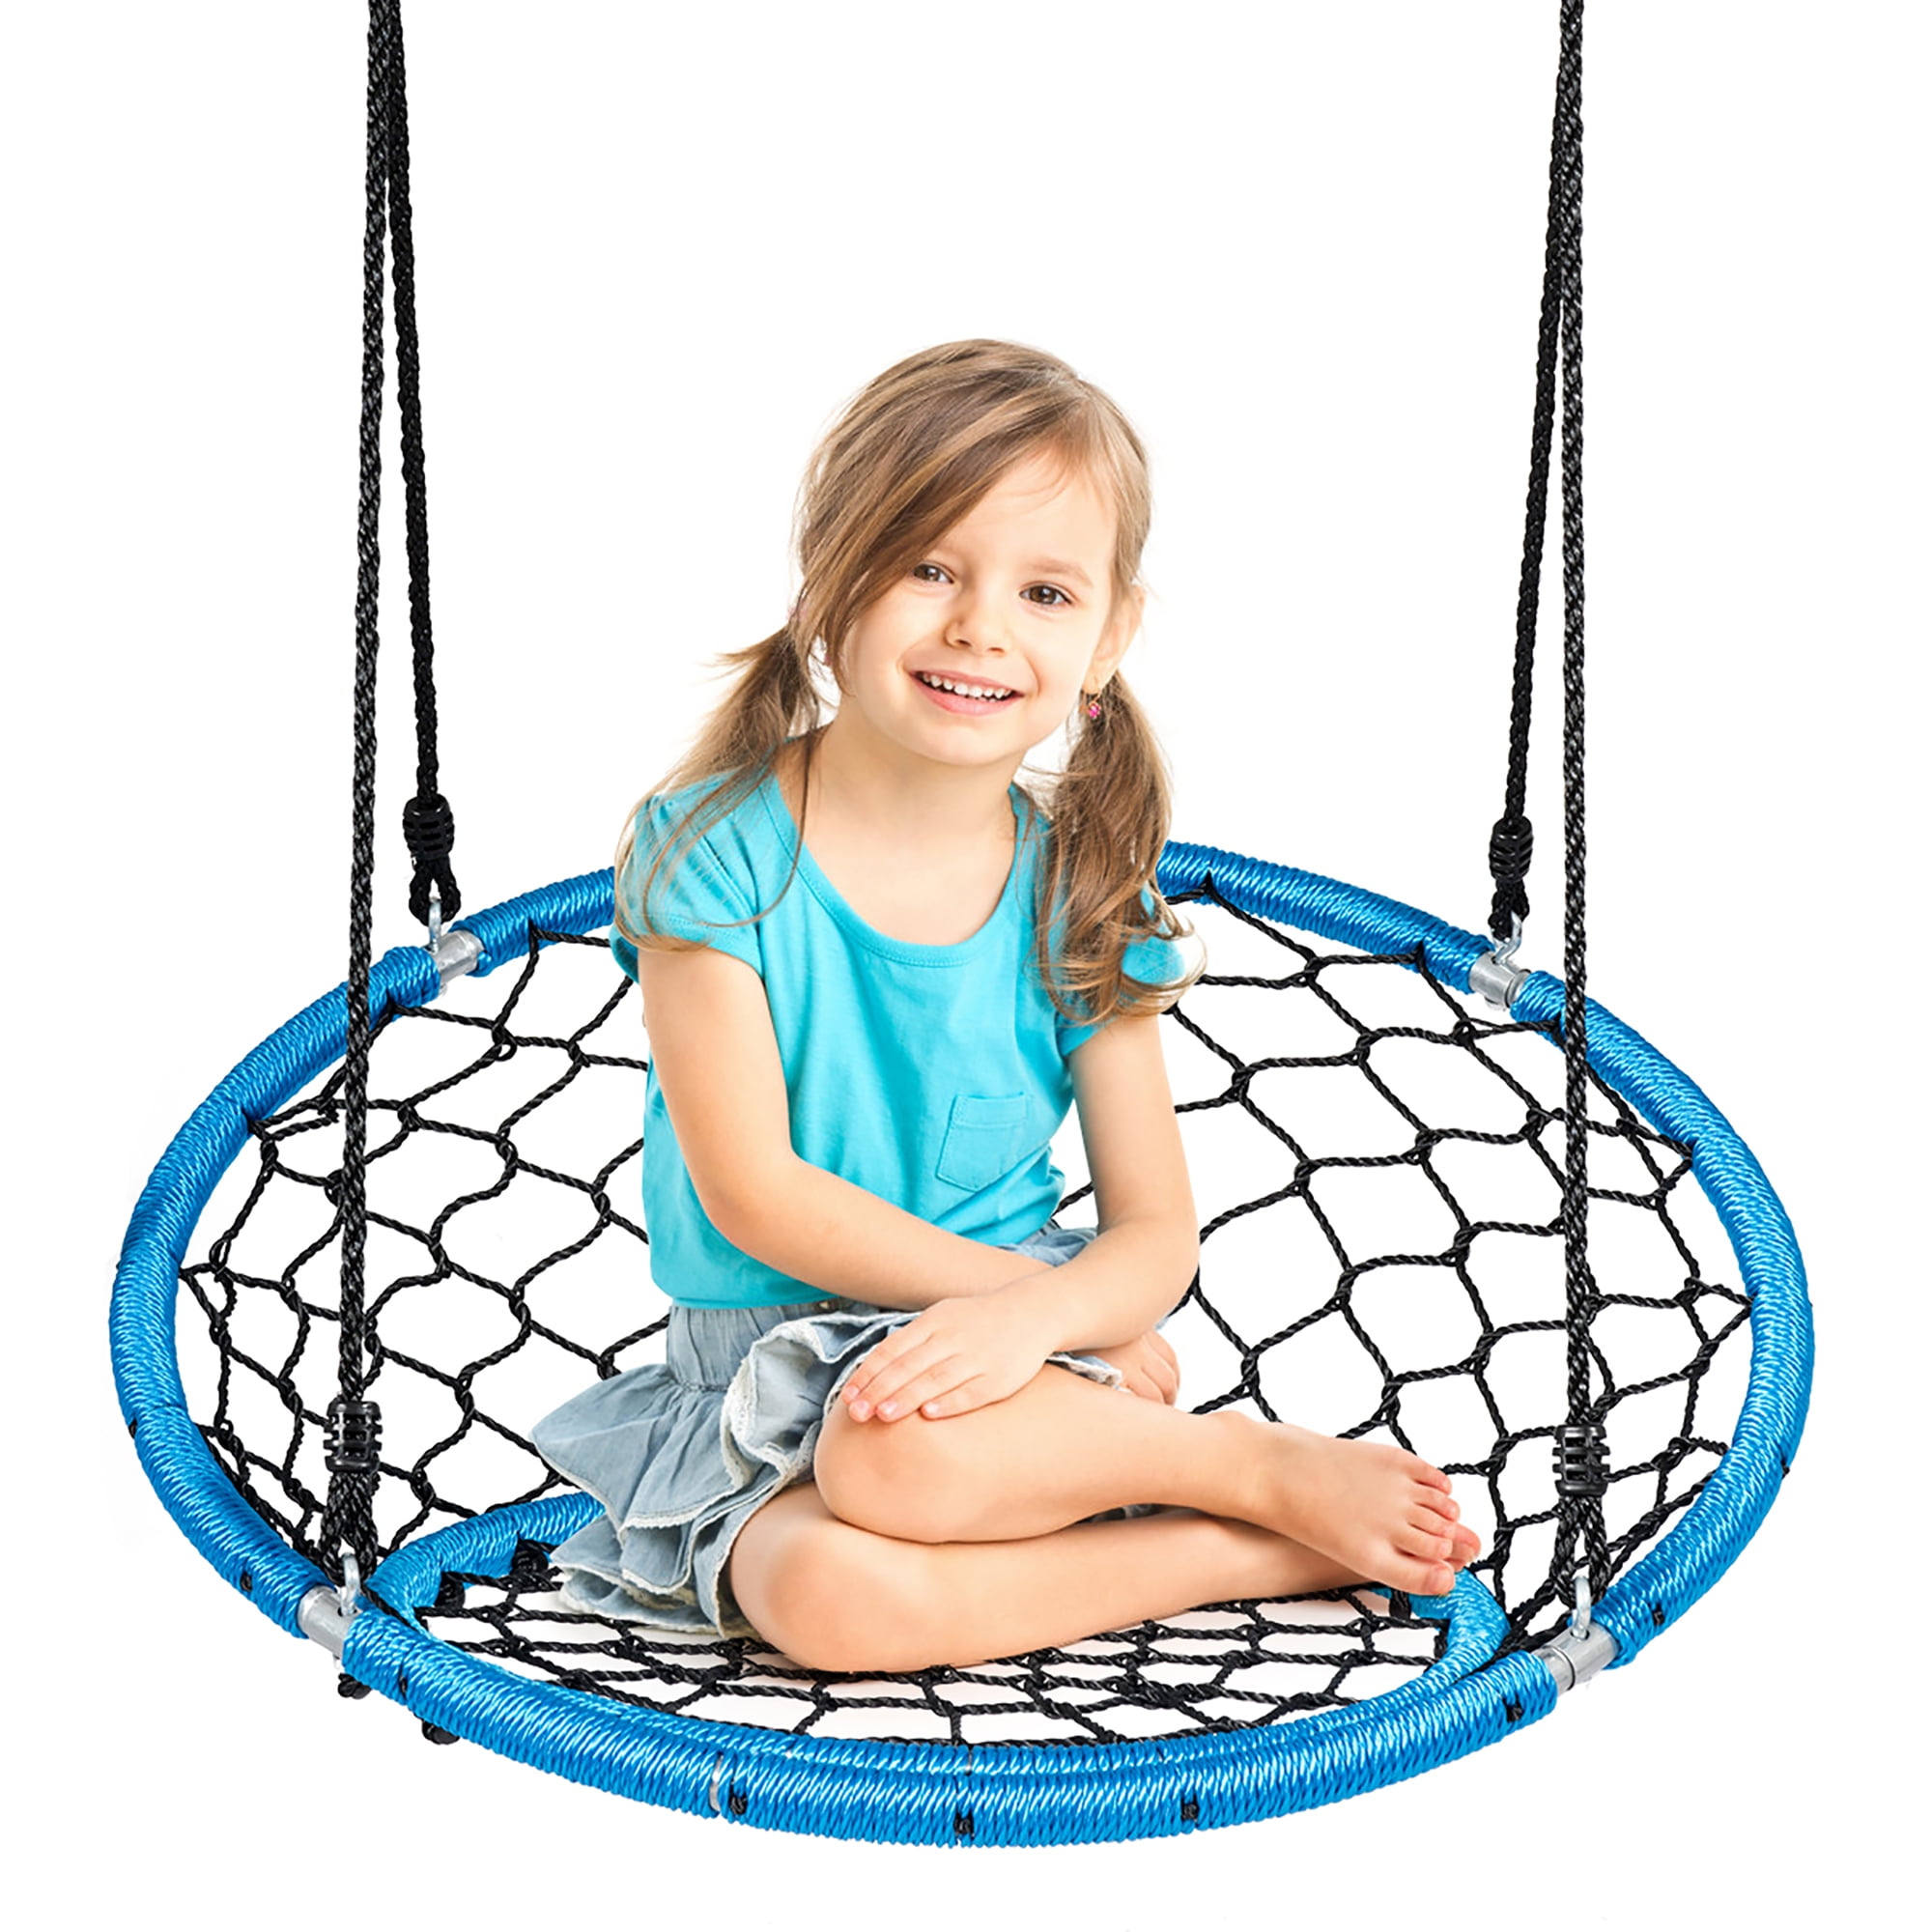 Jacks household 24 Round Hanging Seat Nest Swing Set Spider Web Swing With Adjustable Ropes For Kids Children Adult